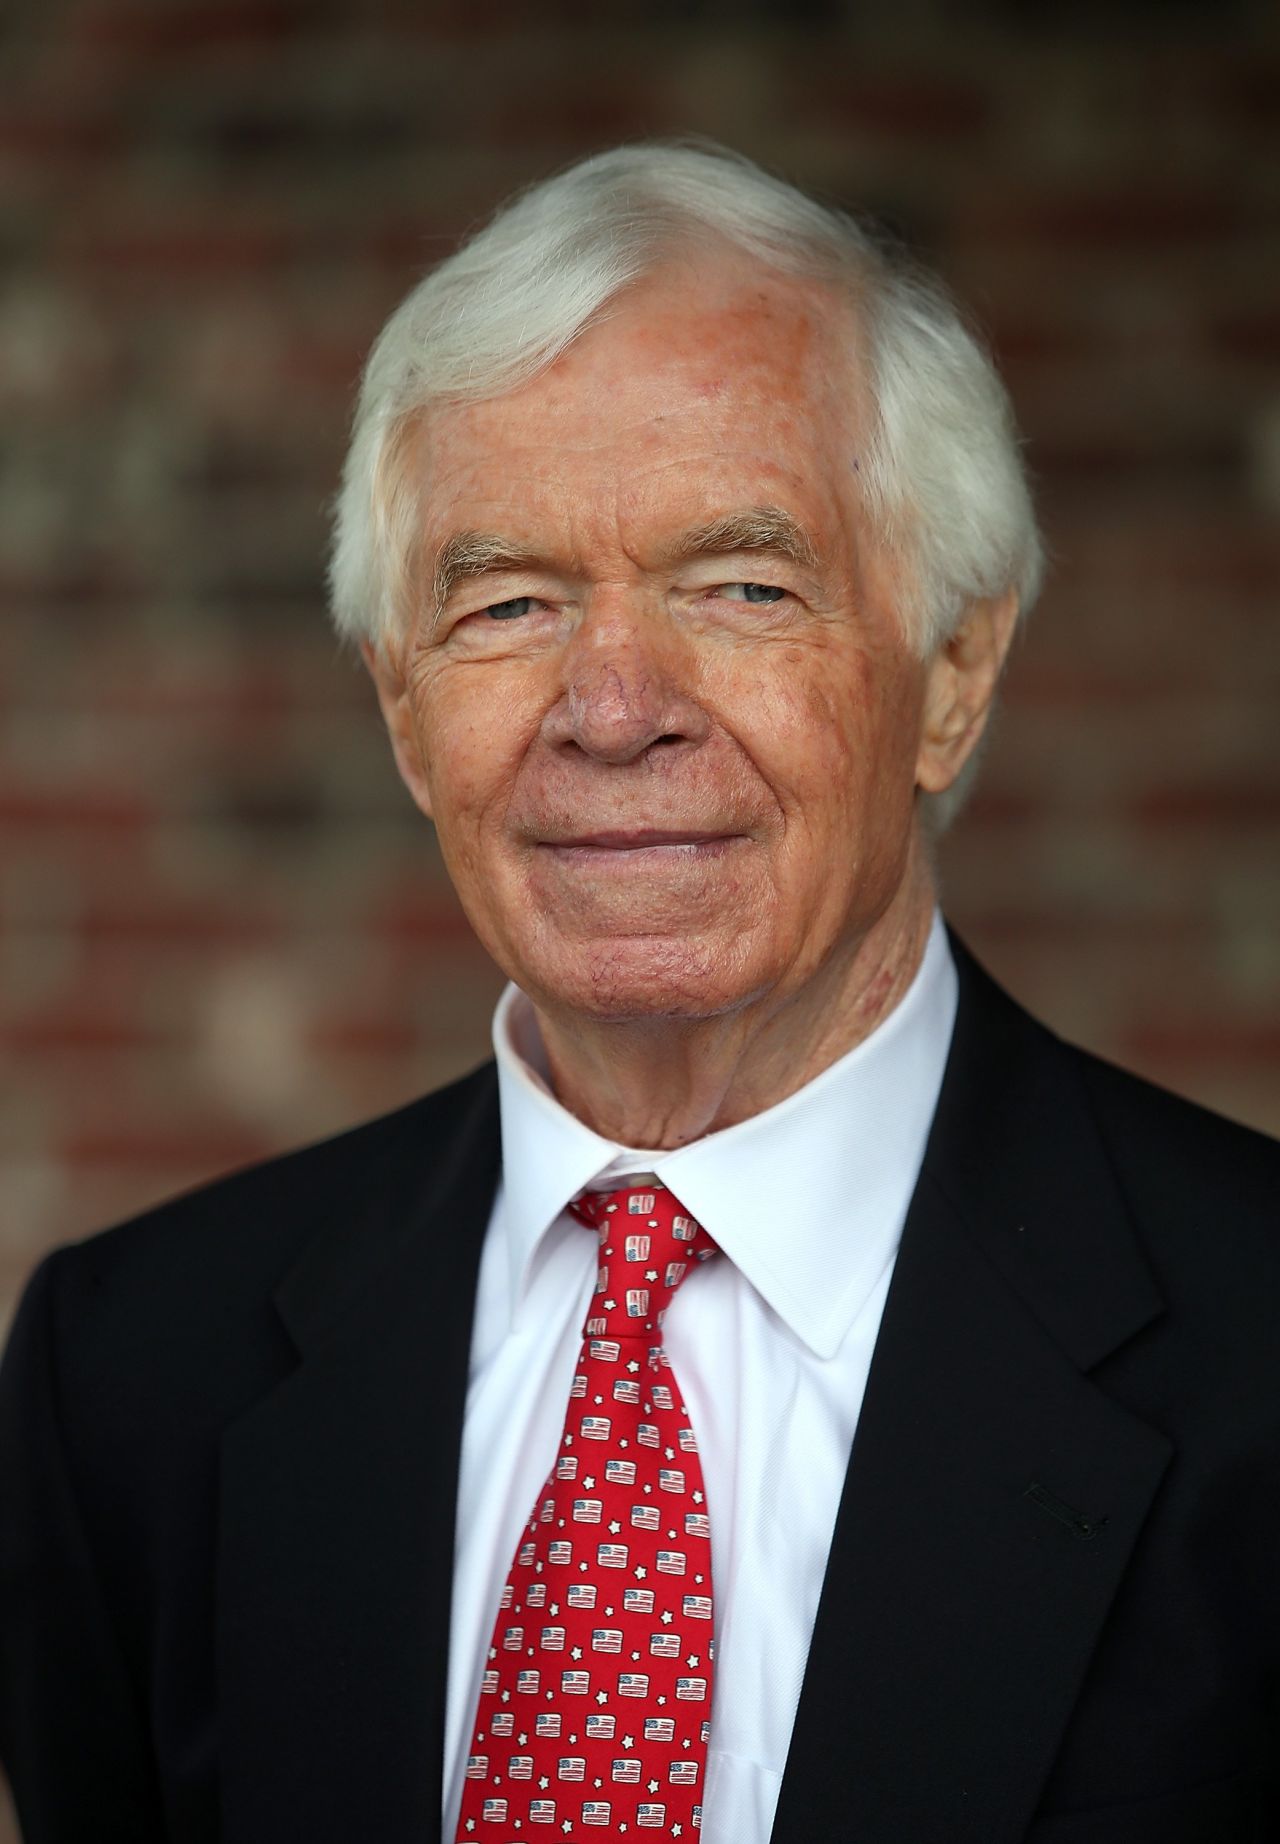 <a href="https://www.cnn.com/2019/05/30/politics/thad-cochran-dies-mississippi-senator/index.html" target="_blank">Thad Cochran</a>, who represented Mississippi in the US Senate for decades, died May 30 at the age of 81, his longtime spokesman said in a statement. Cochran resigned his seat last year because of health issues.